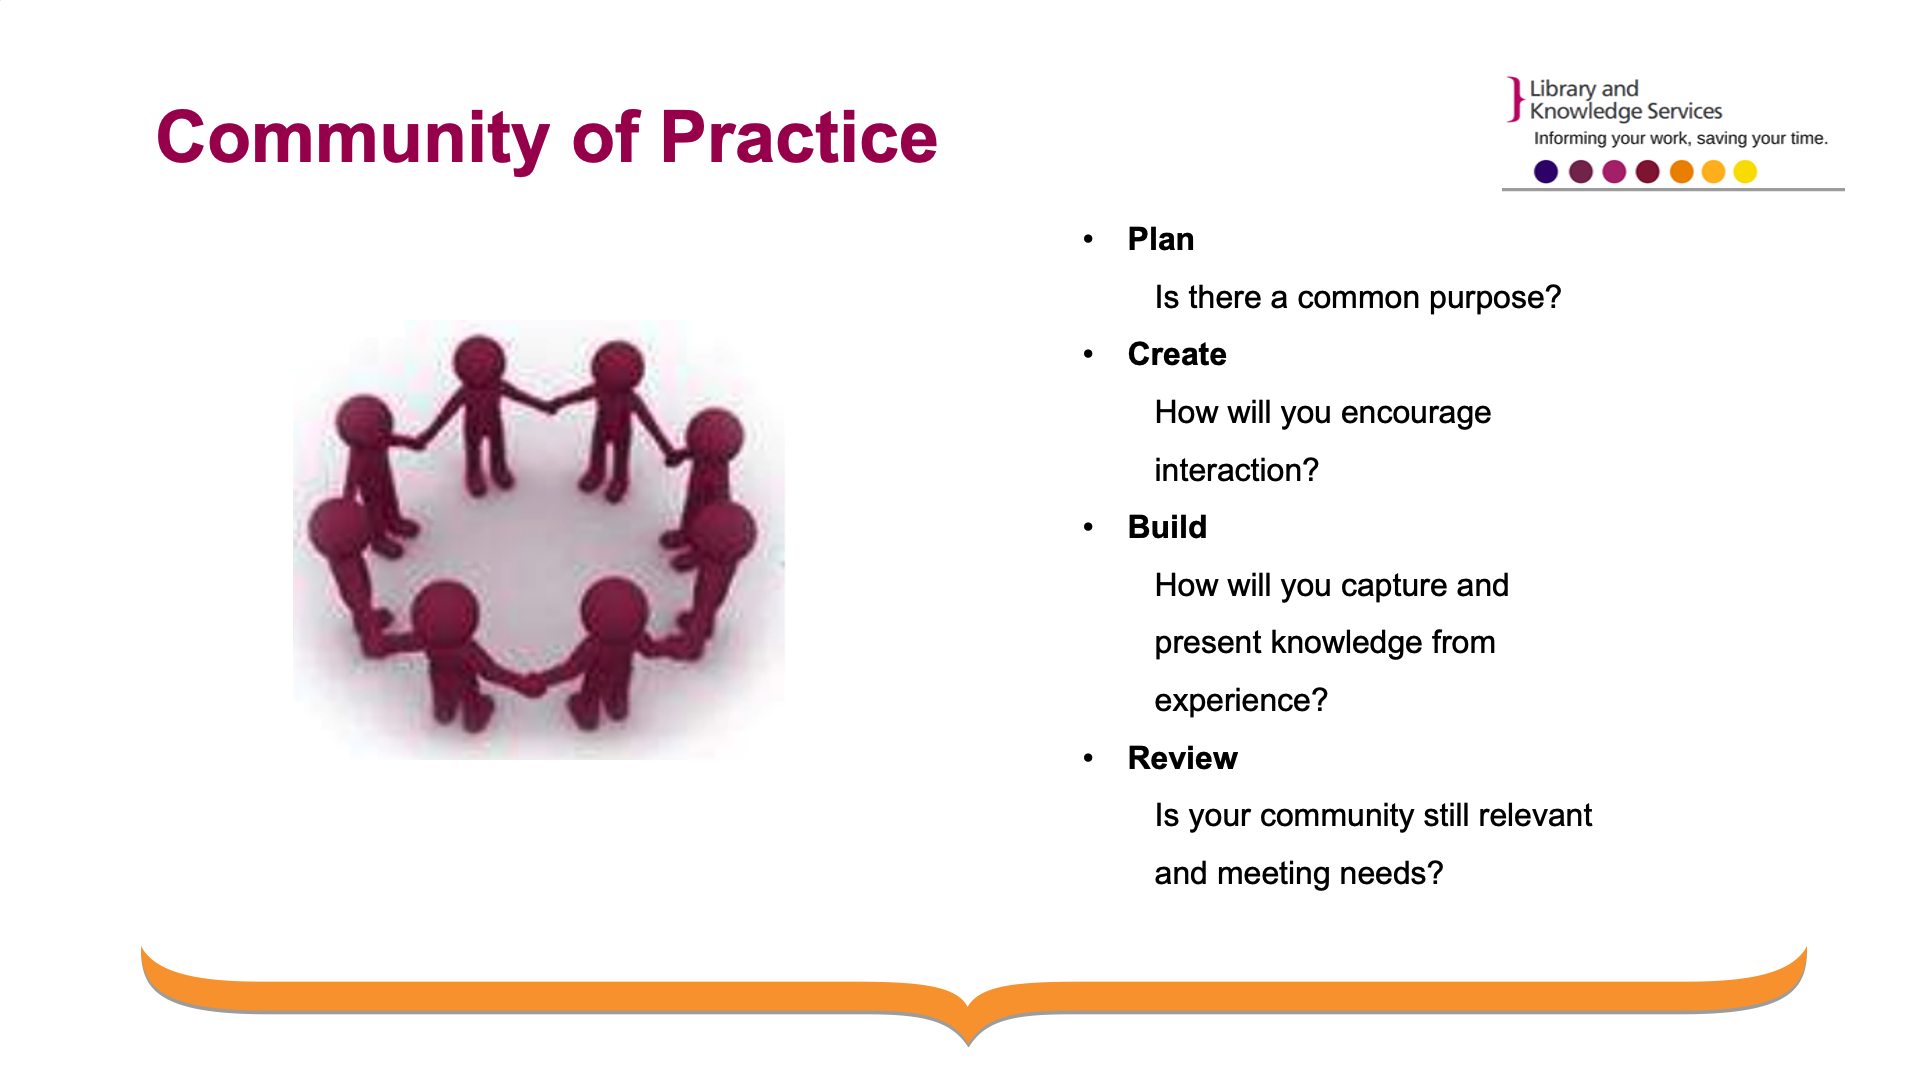 Title: Community of practice. Text on page: 